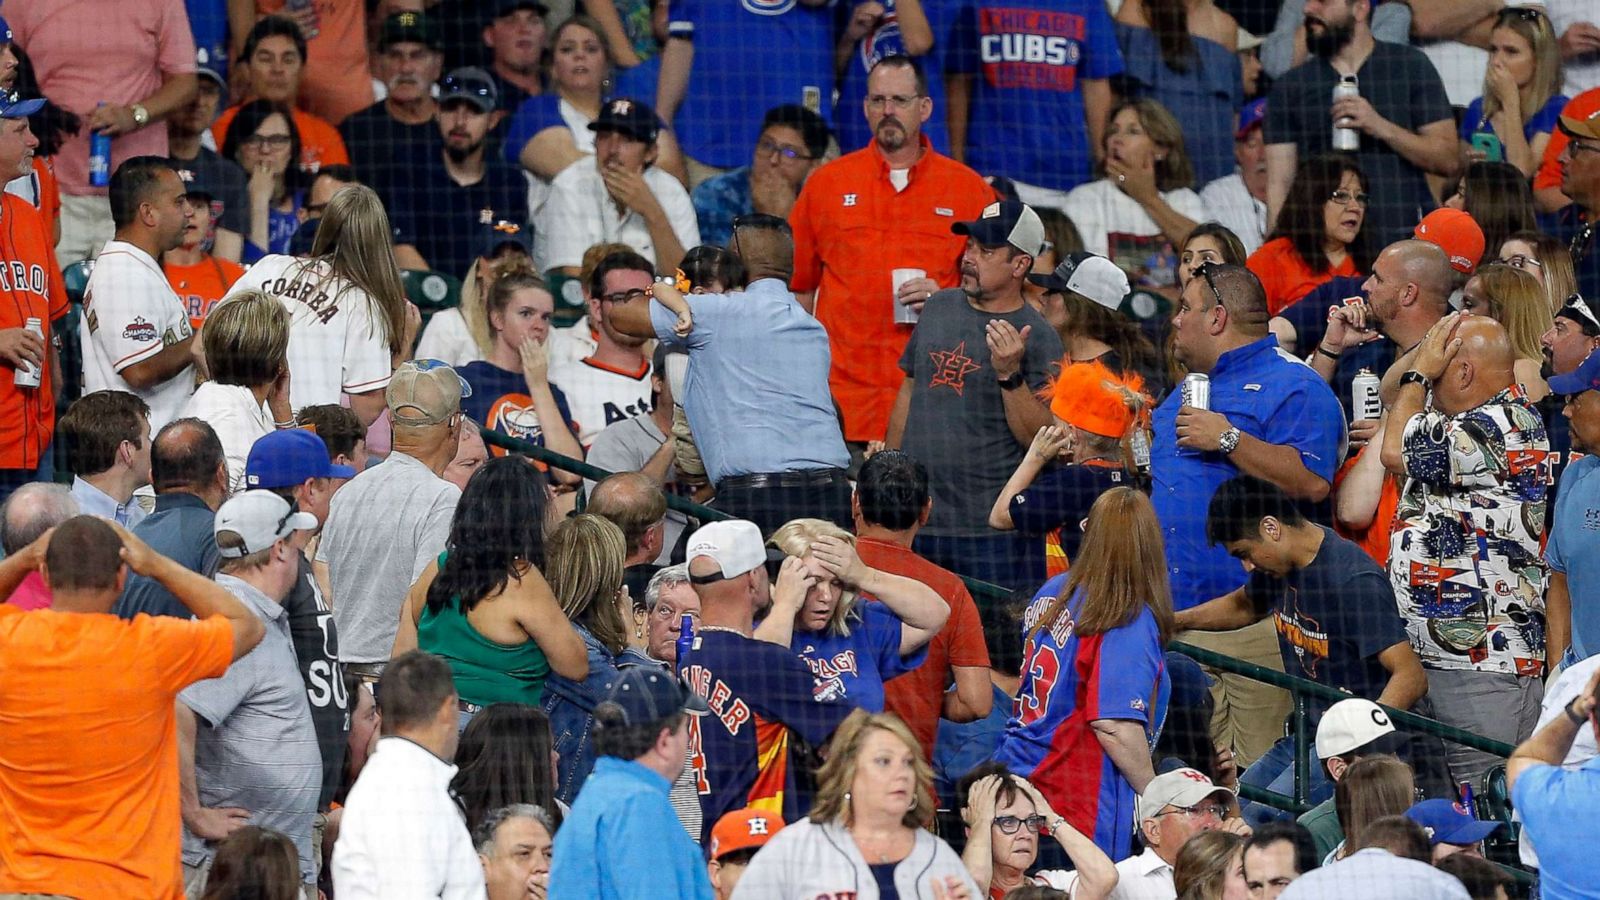 Young girl hit by foul ball at Astros game suffers from brain injury,  attorney says - The Washington Post